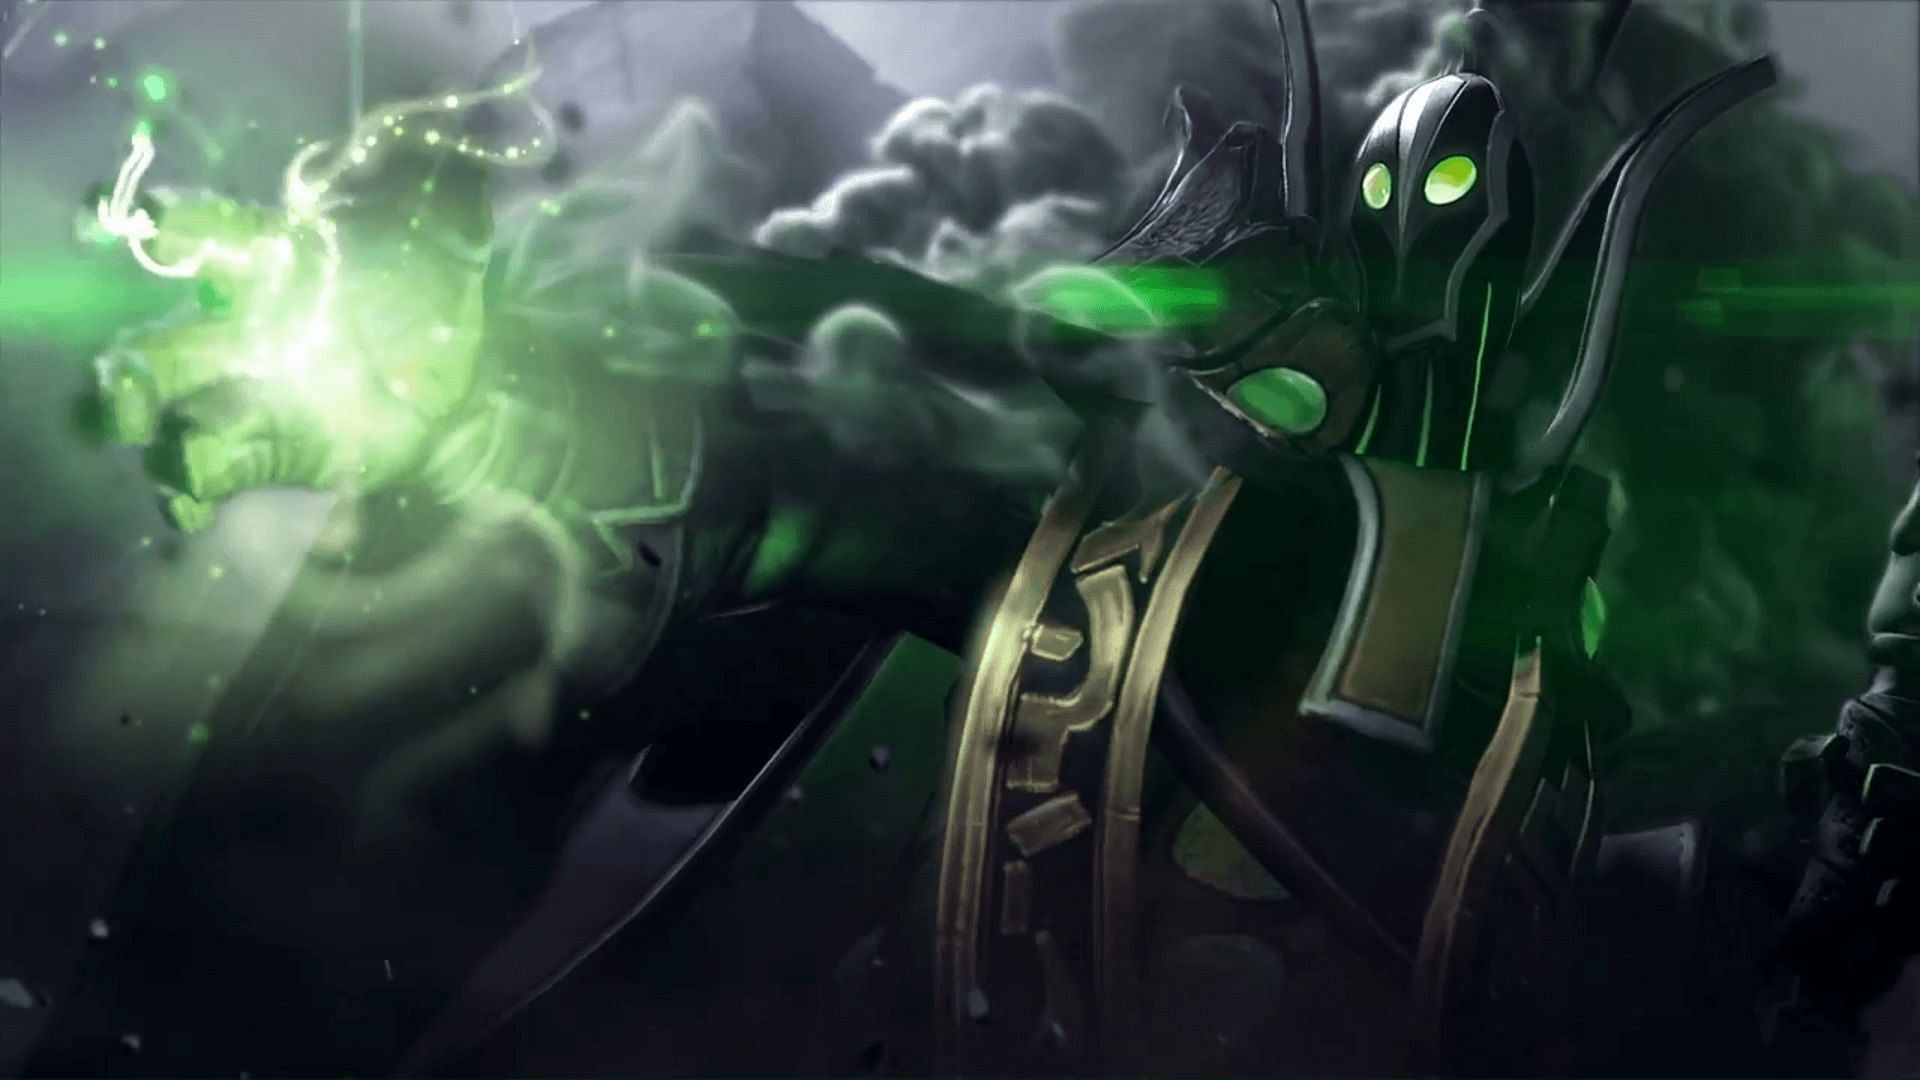 Black King Bar is reworked yet again in Dota 2 patch 7.33